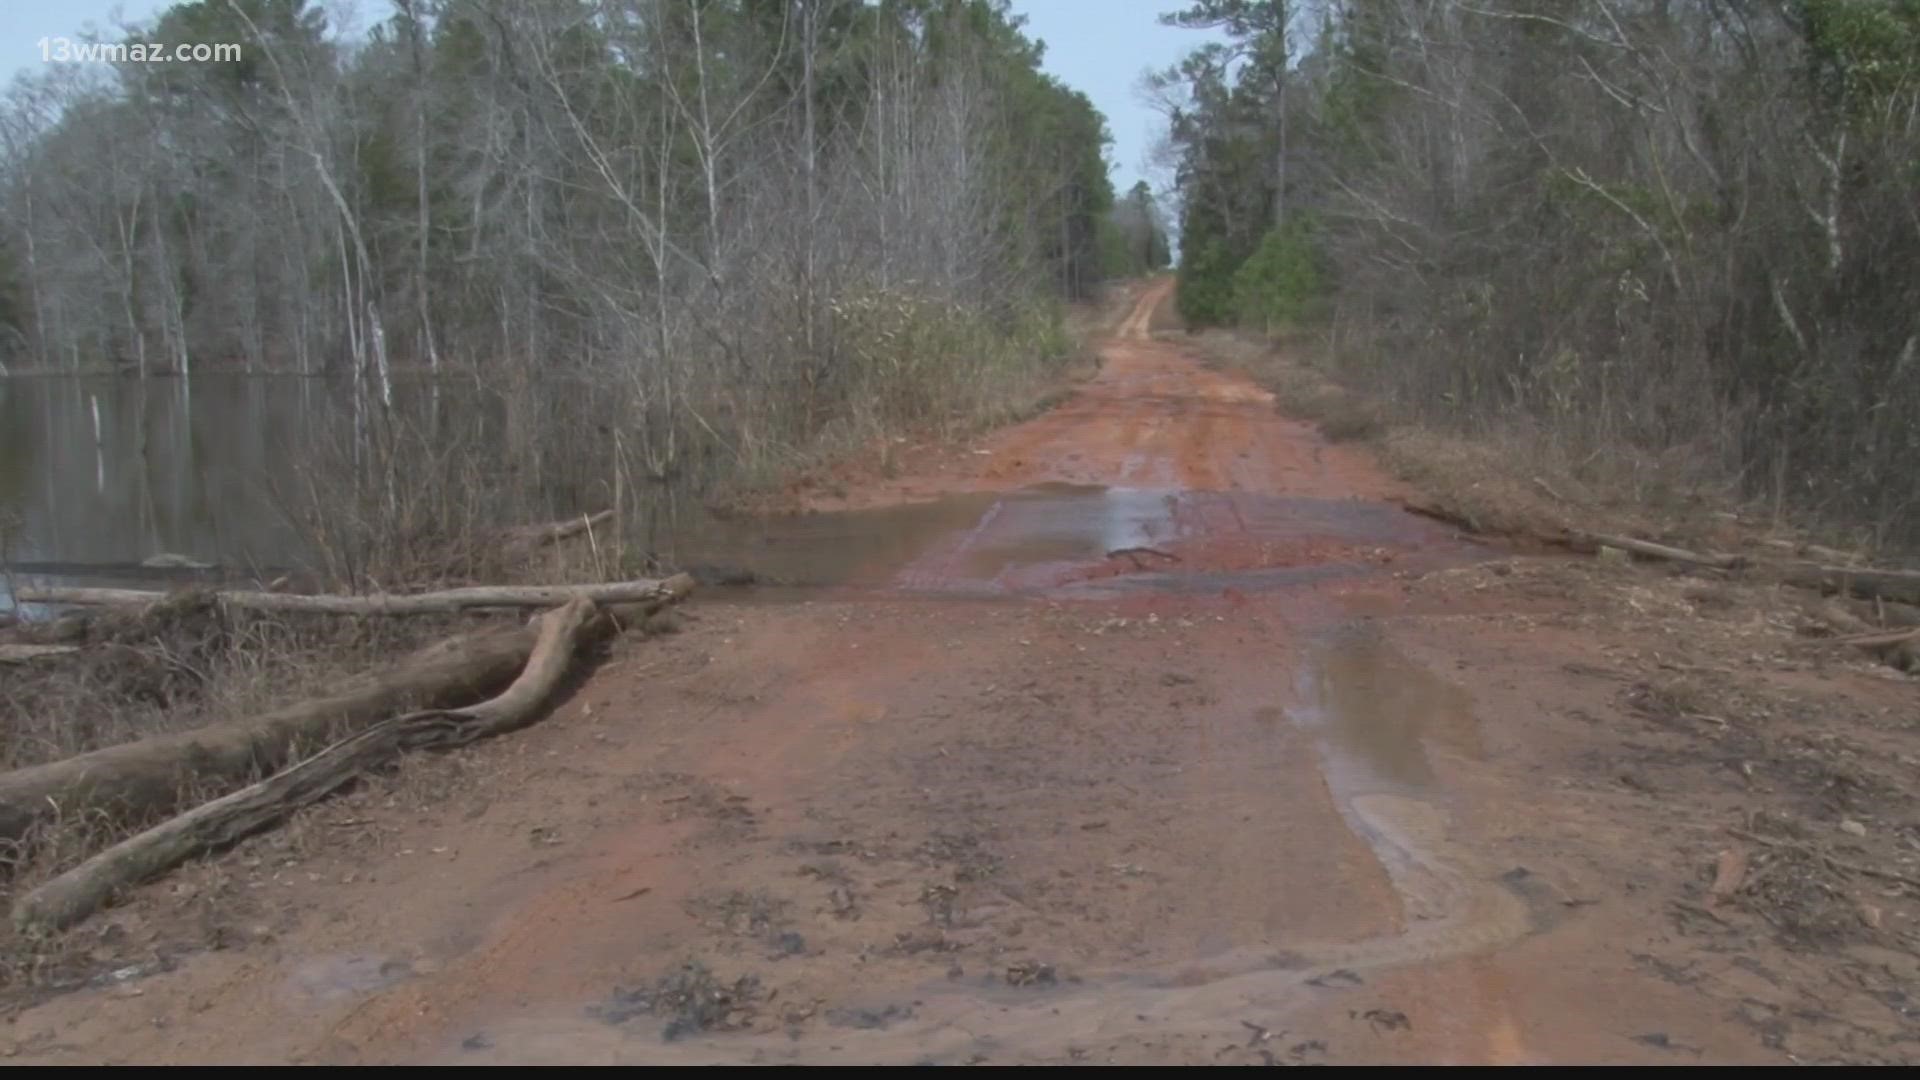 Marsha Poole Yow says her 80-year-old mother has  injured both her hips, and their unmaintained dirt road makes it hard for them to leave the house.